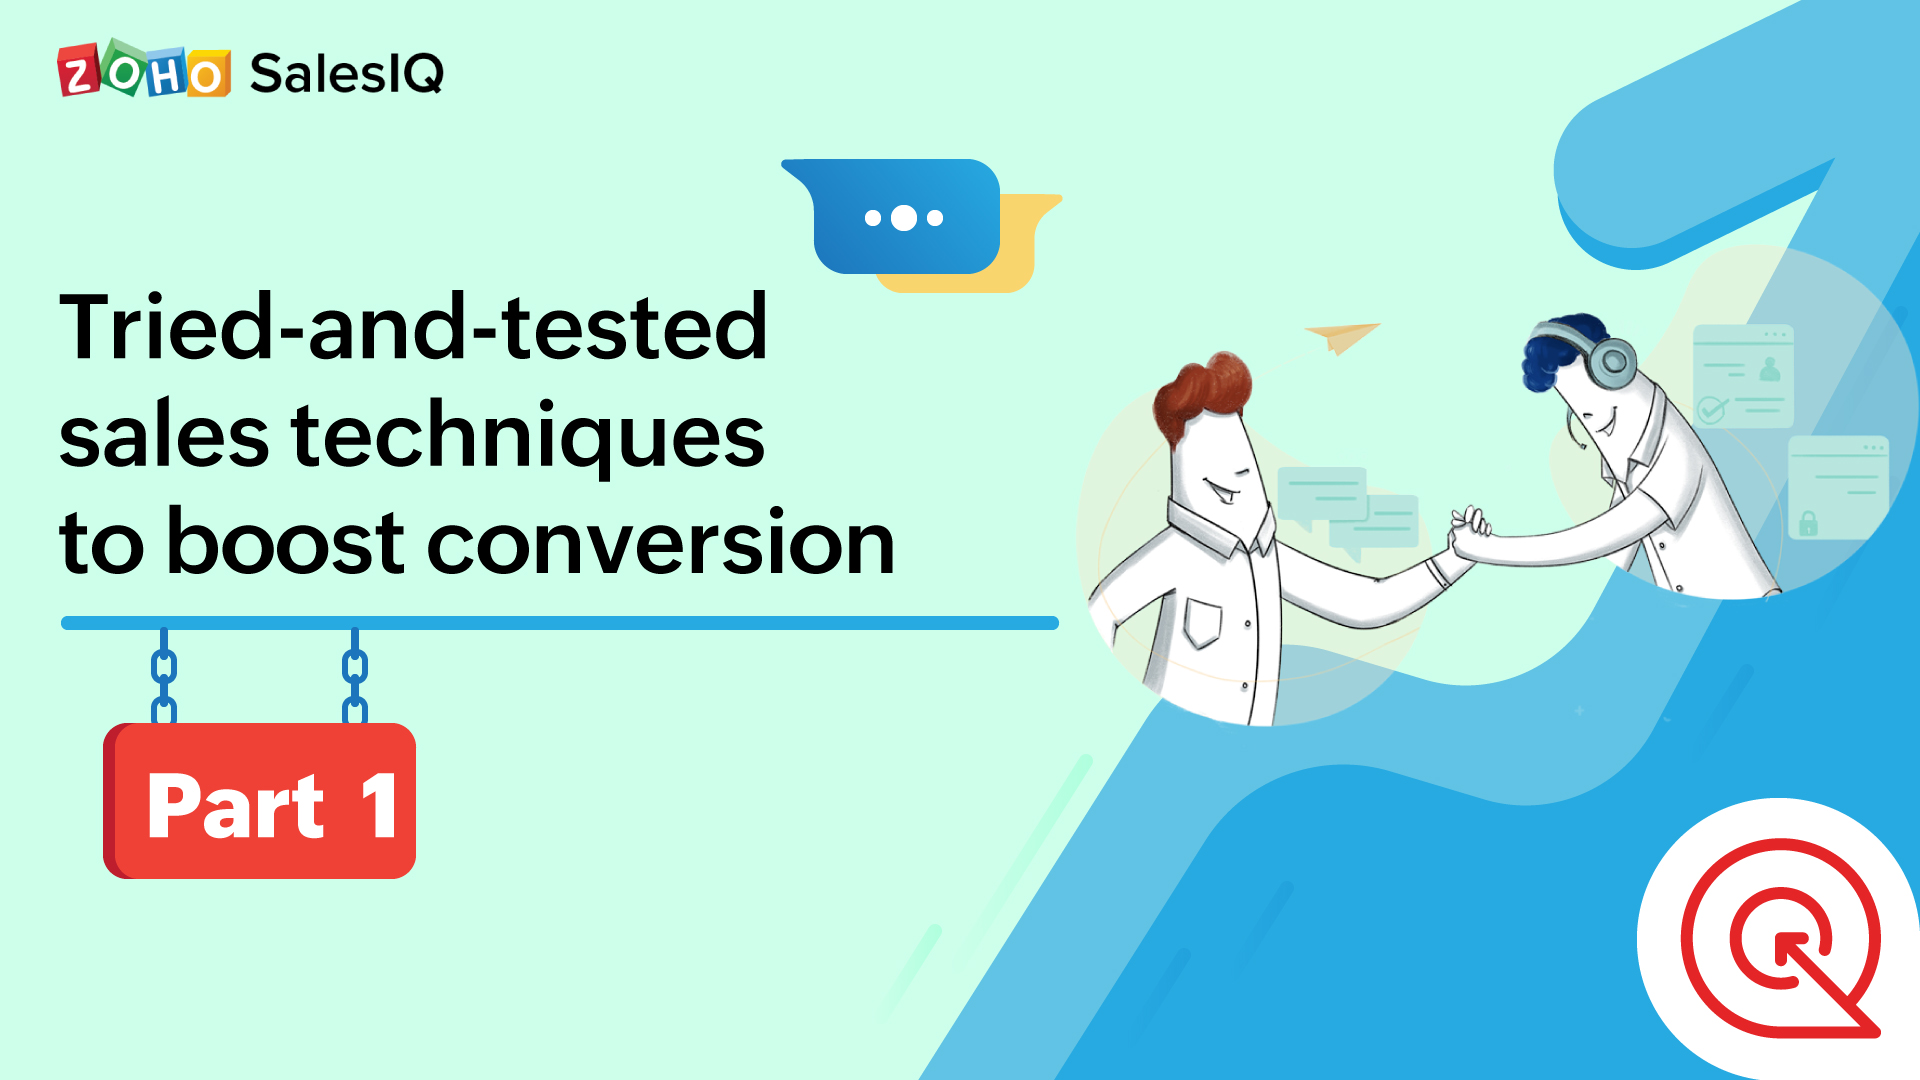 Tried-and-tested sales techniques to move leads down the sales funnel quicker: Part 1